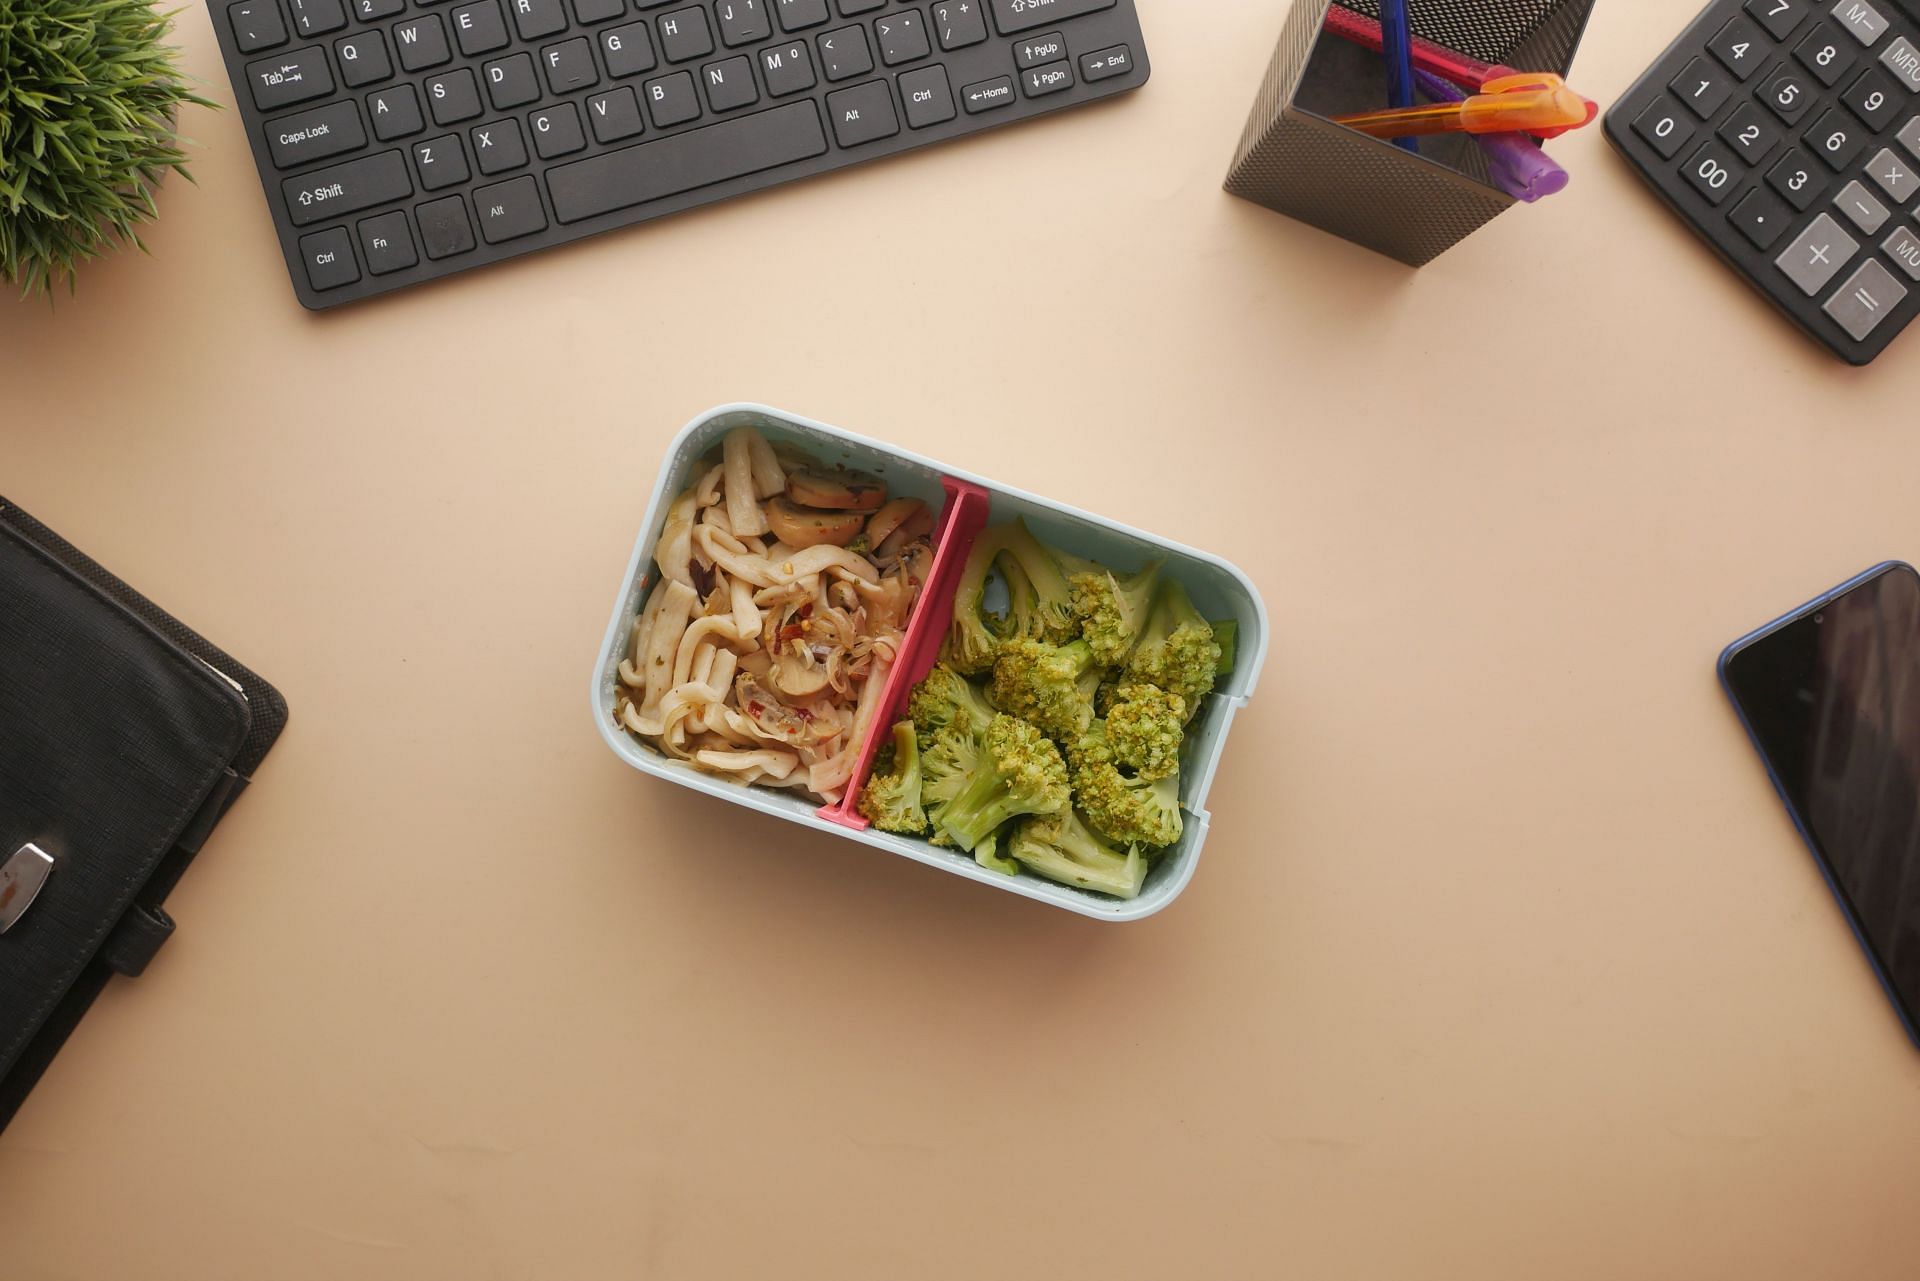 options for healthy office snacks that you can enjoy (Image via Pexels)